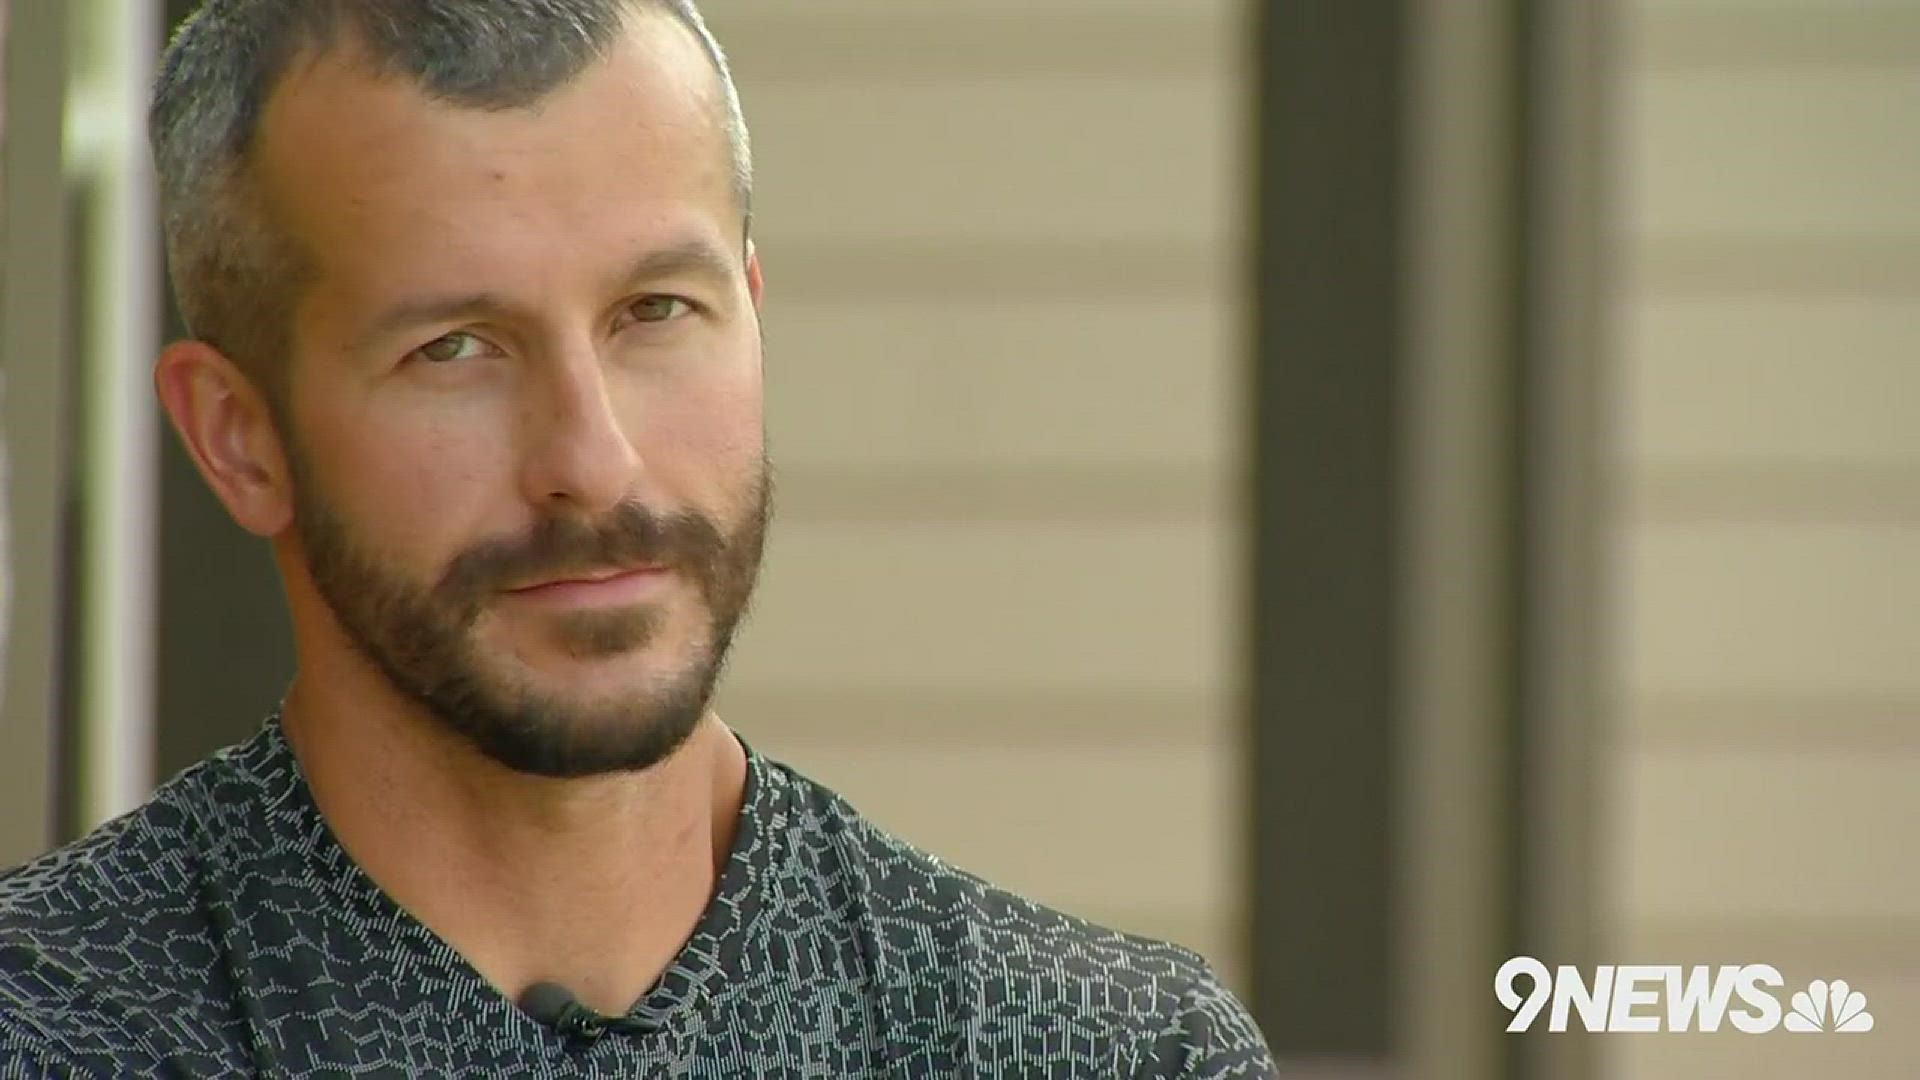 Watch what Chris Watts said 24 hours before family members say he confessed to killing his wife Shanann and two daughters.